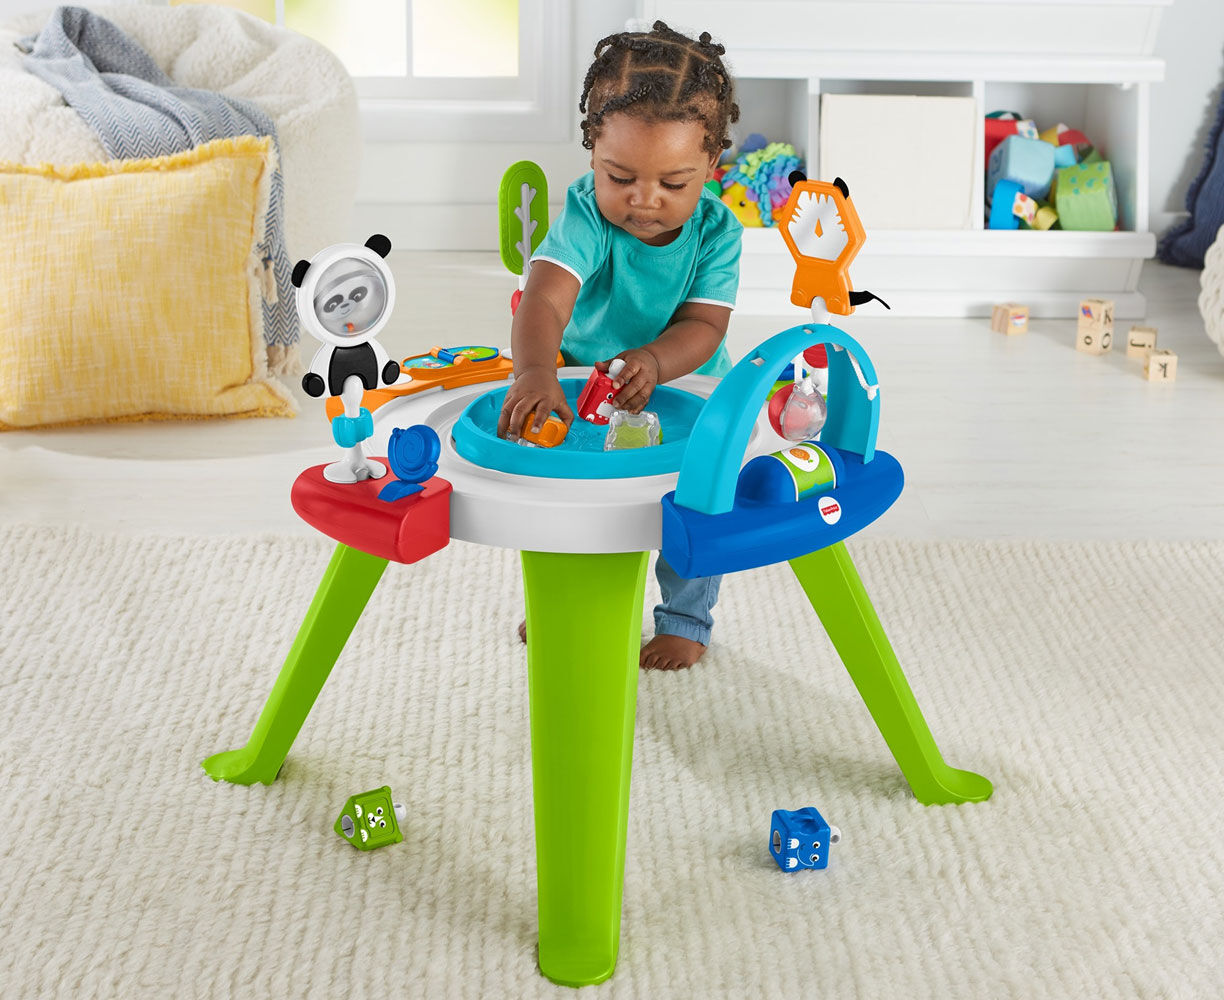 spin and sort activity center